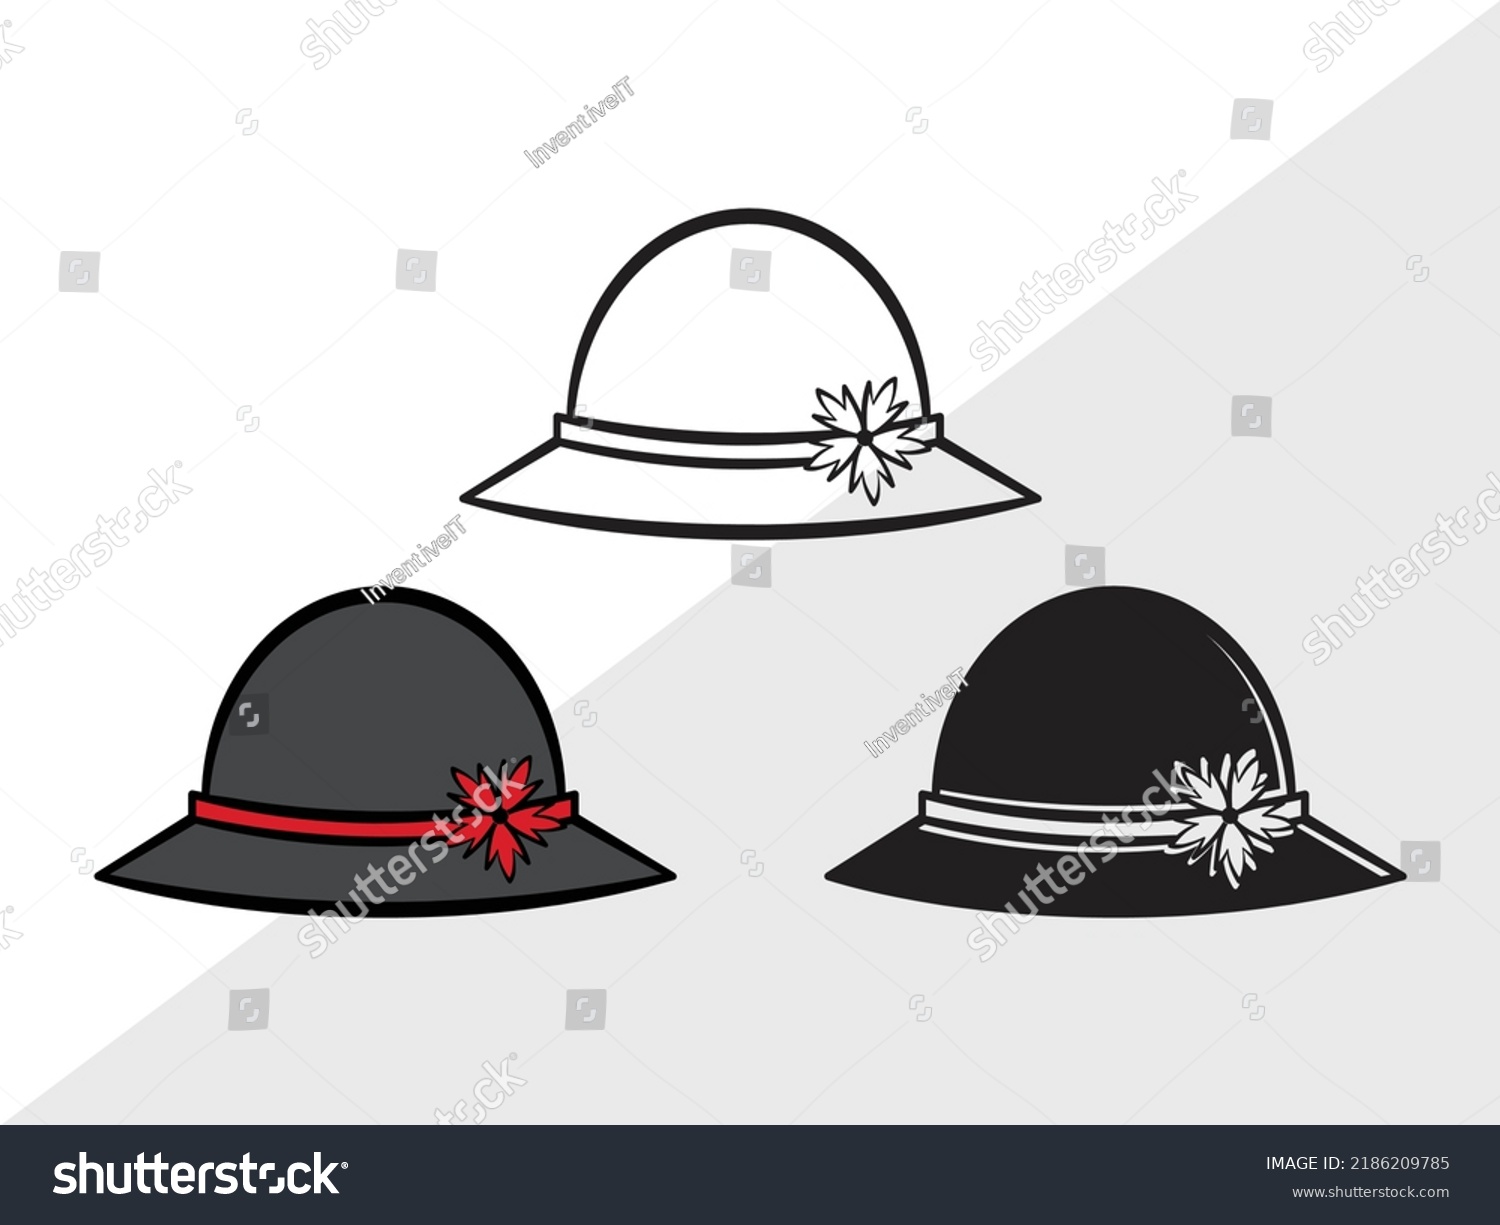 Top Hat Svg Printable Vector Illustration Stock Vector (royalty Free 